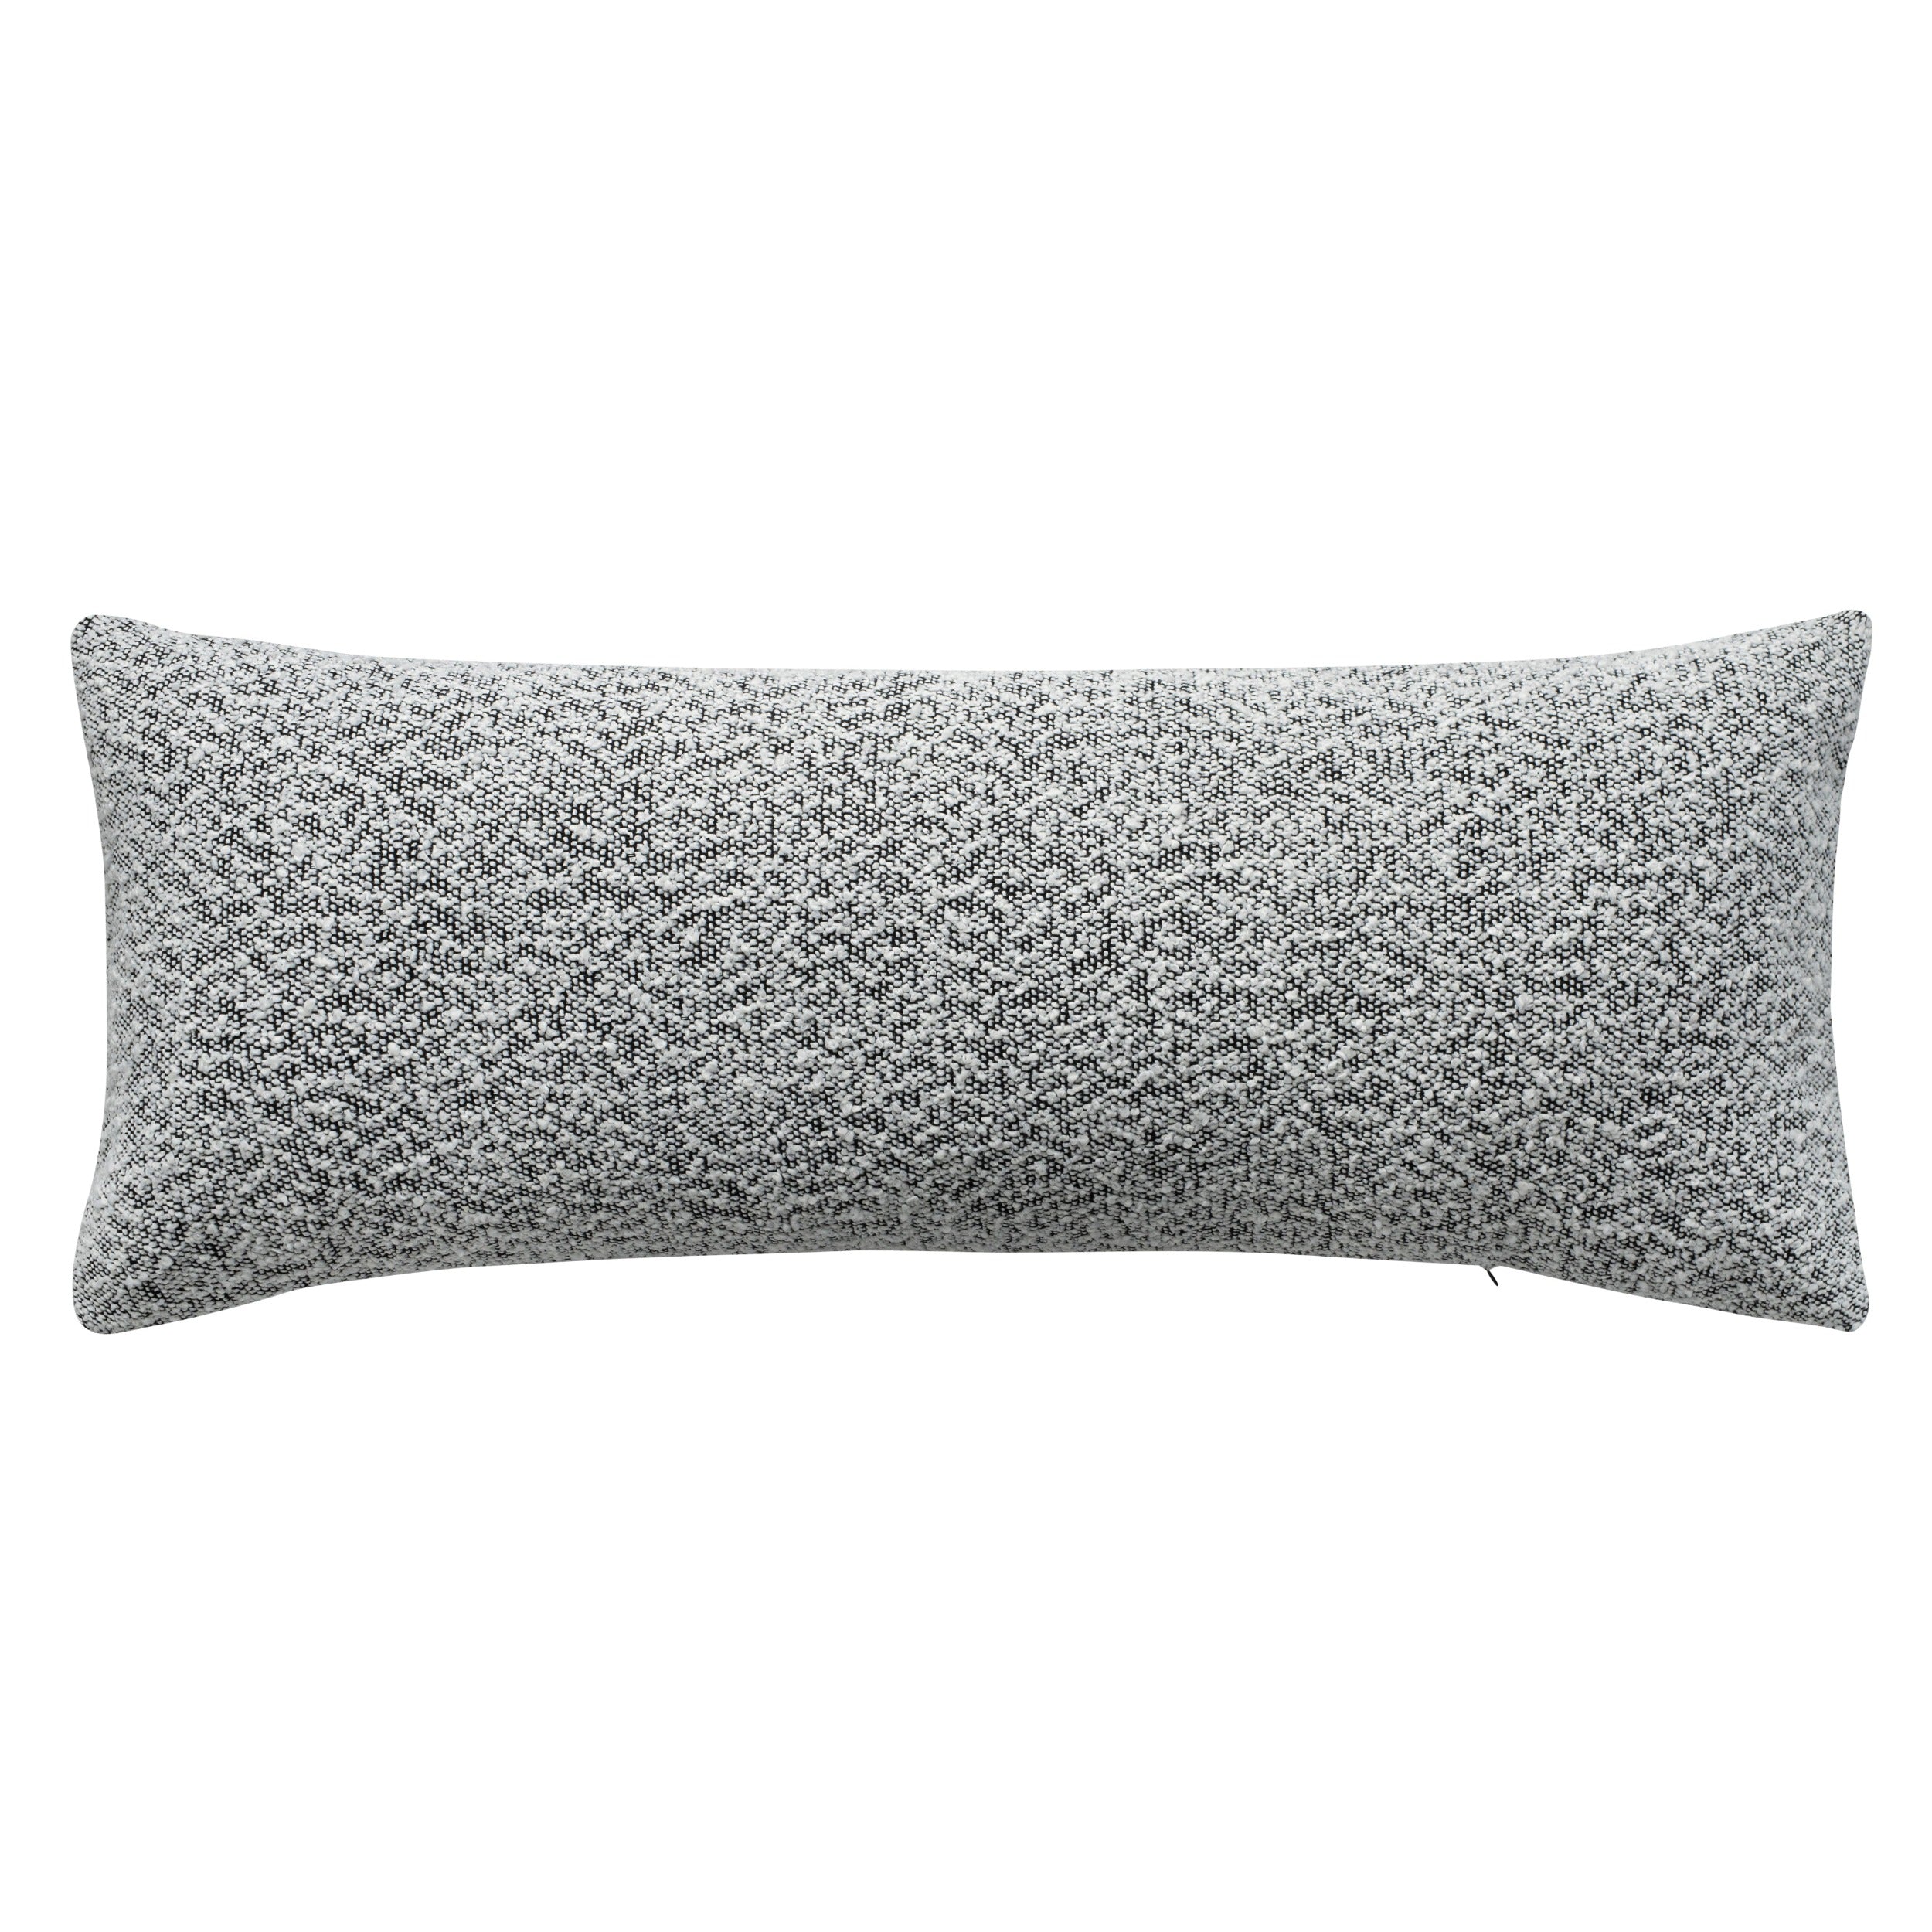 Aura Home Black and White Speckled Boucle Throw Pillow